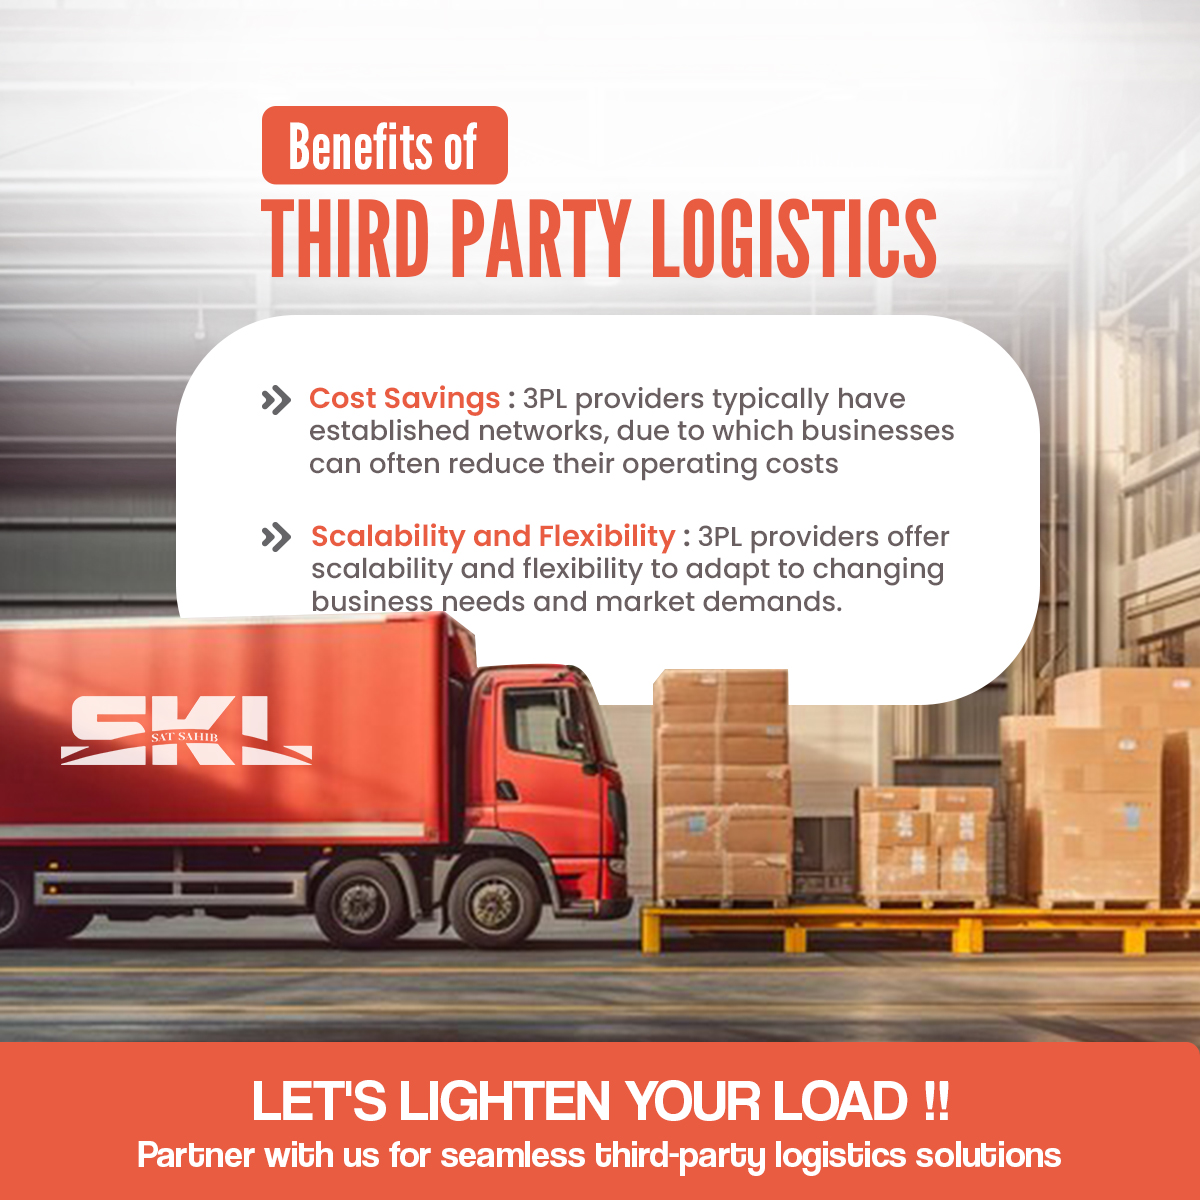 Unlock the power of 3PL logistics! Benefit from cost savings, scalability, and flexibility that adapt to your business needs. Experience the benefits of optimized logistics with us.
.
#satkabirlogistics #3pl #logisticssolutions #logisticservices #CostEfficient